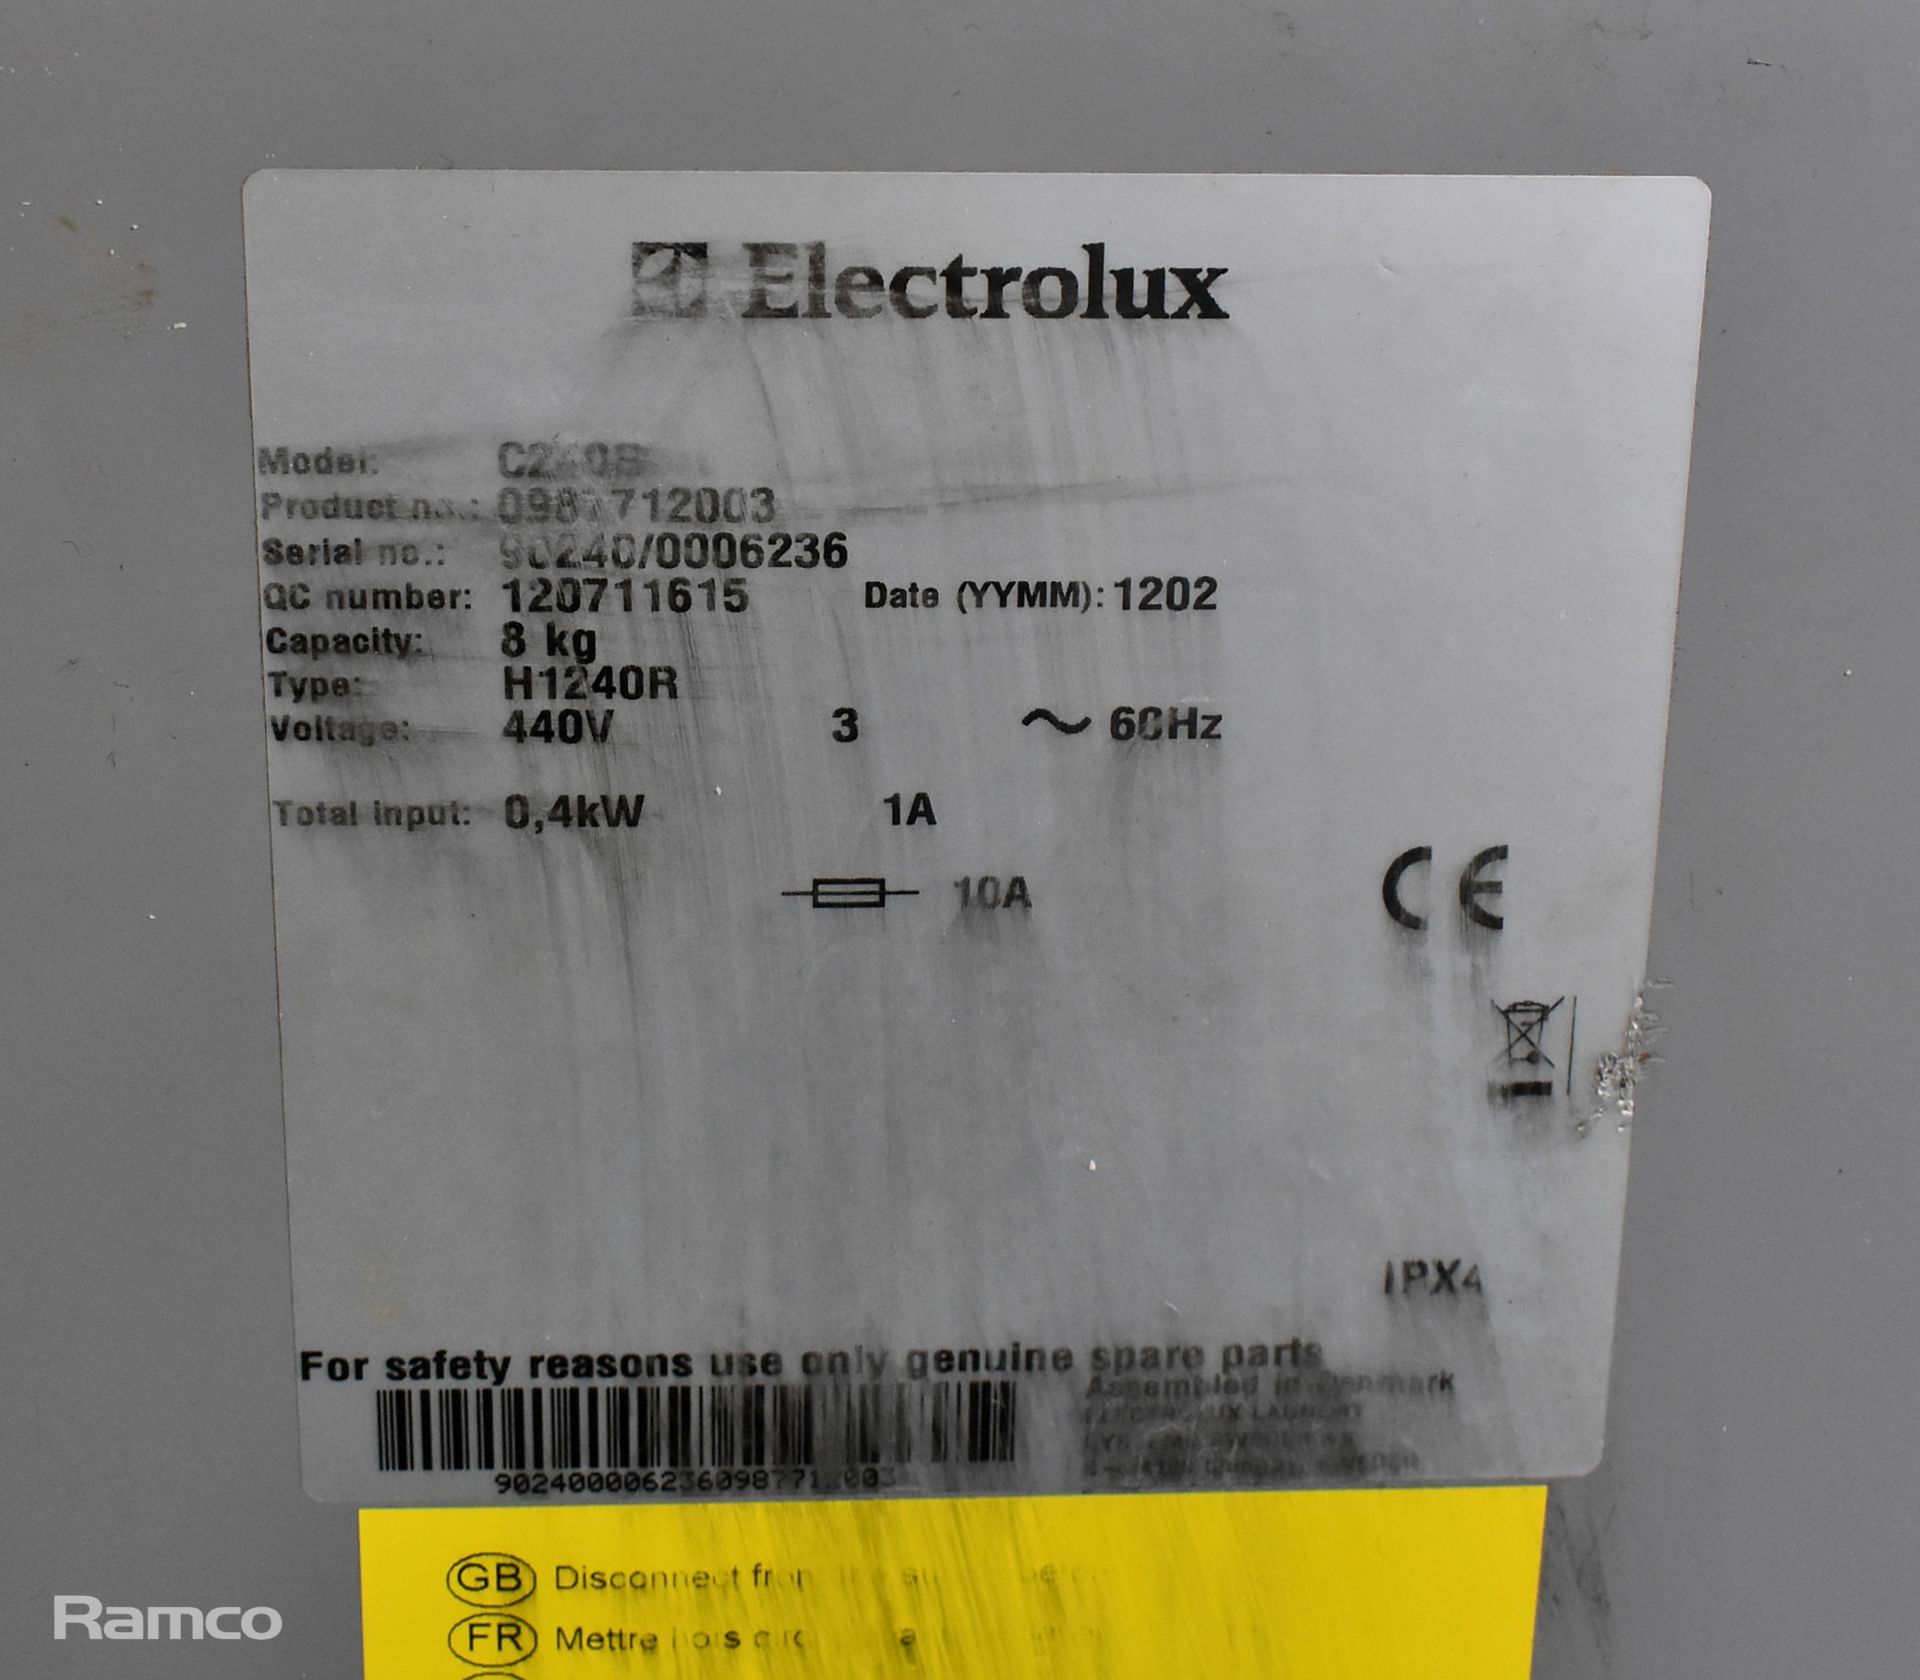 Electrolux C240R hydro extraction unit - 440V - W 510 x D 660 x H 890mm - Image 5 of 5